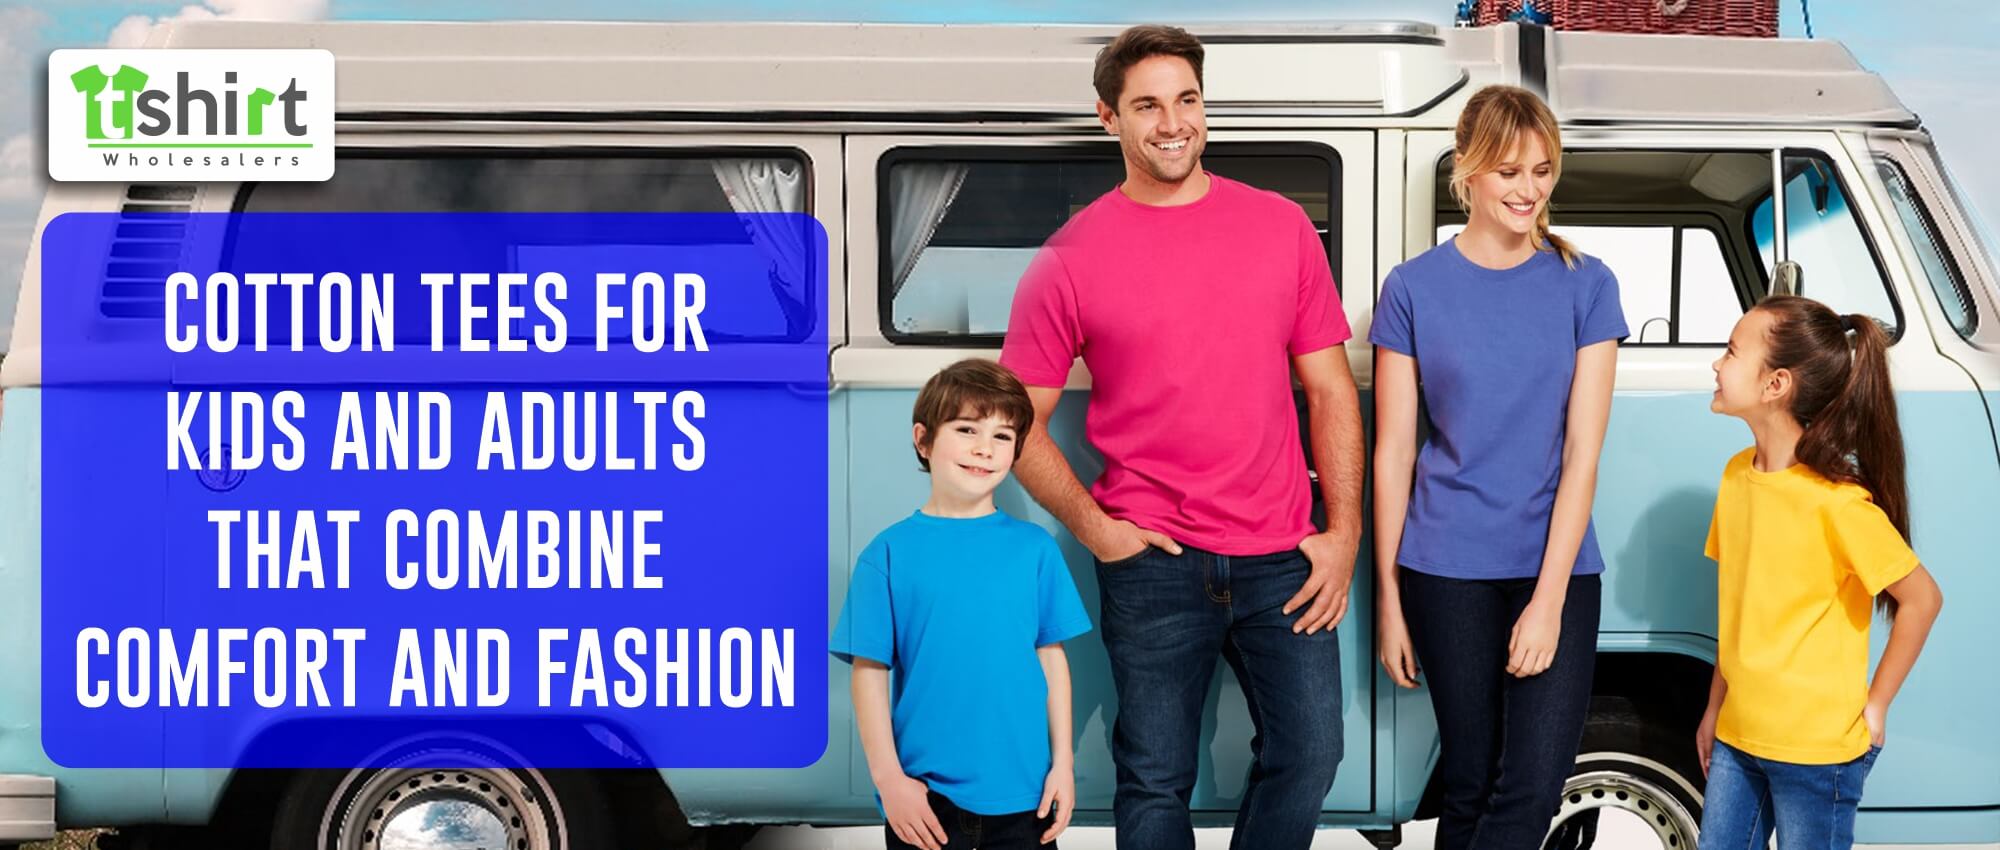 COTTON TEES FOR KIDS AND ADULTS THAT COMBINE COMFORT AND FASHION